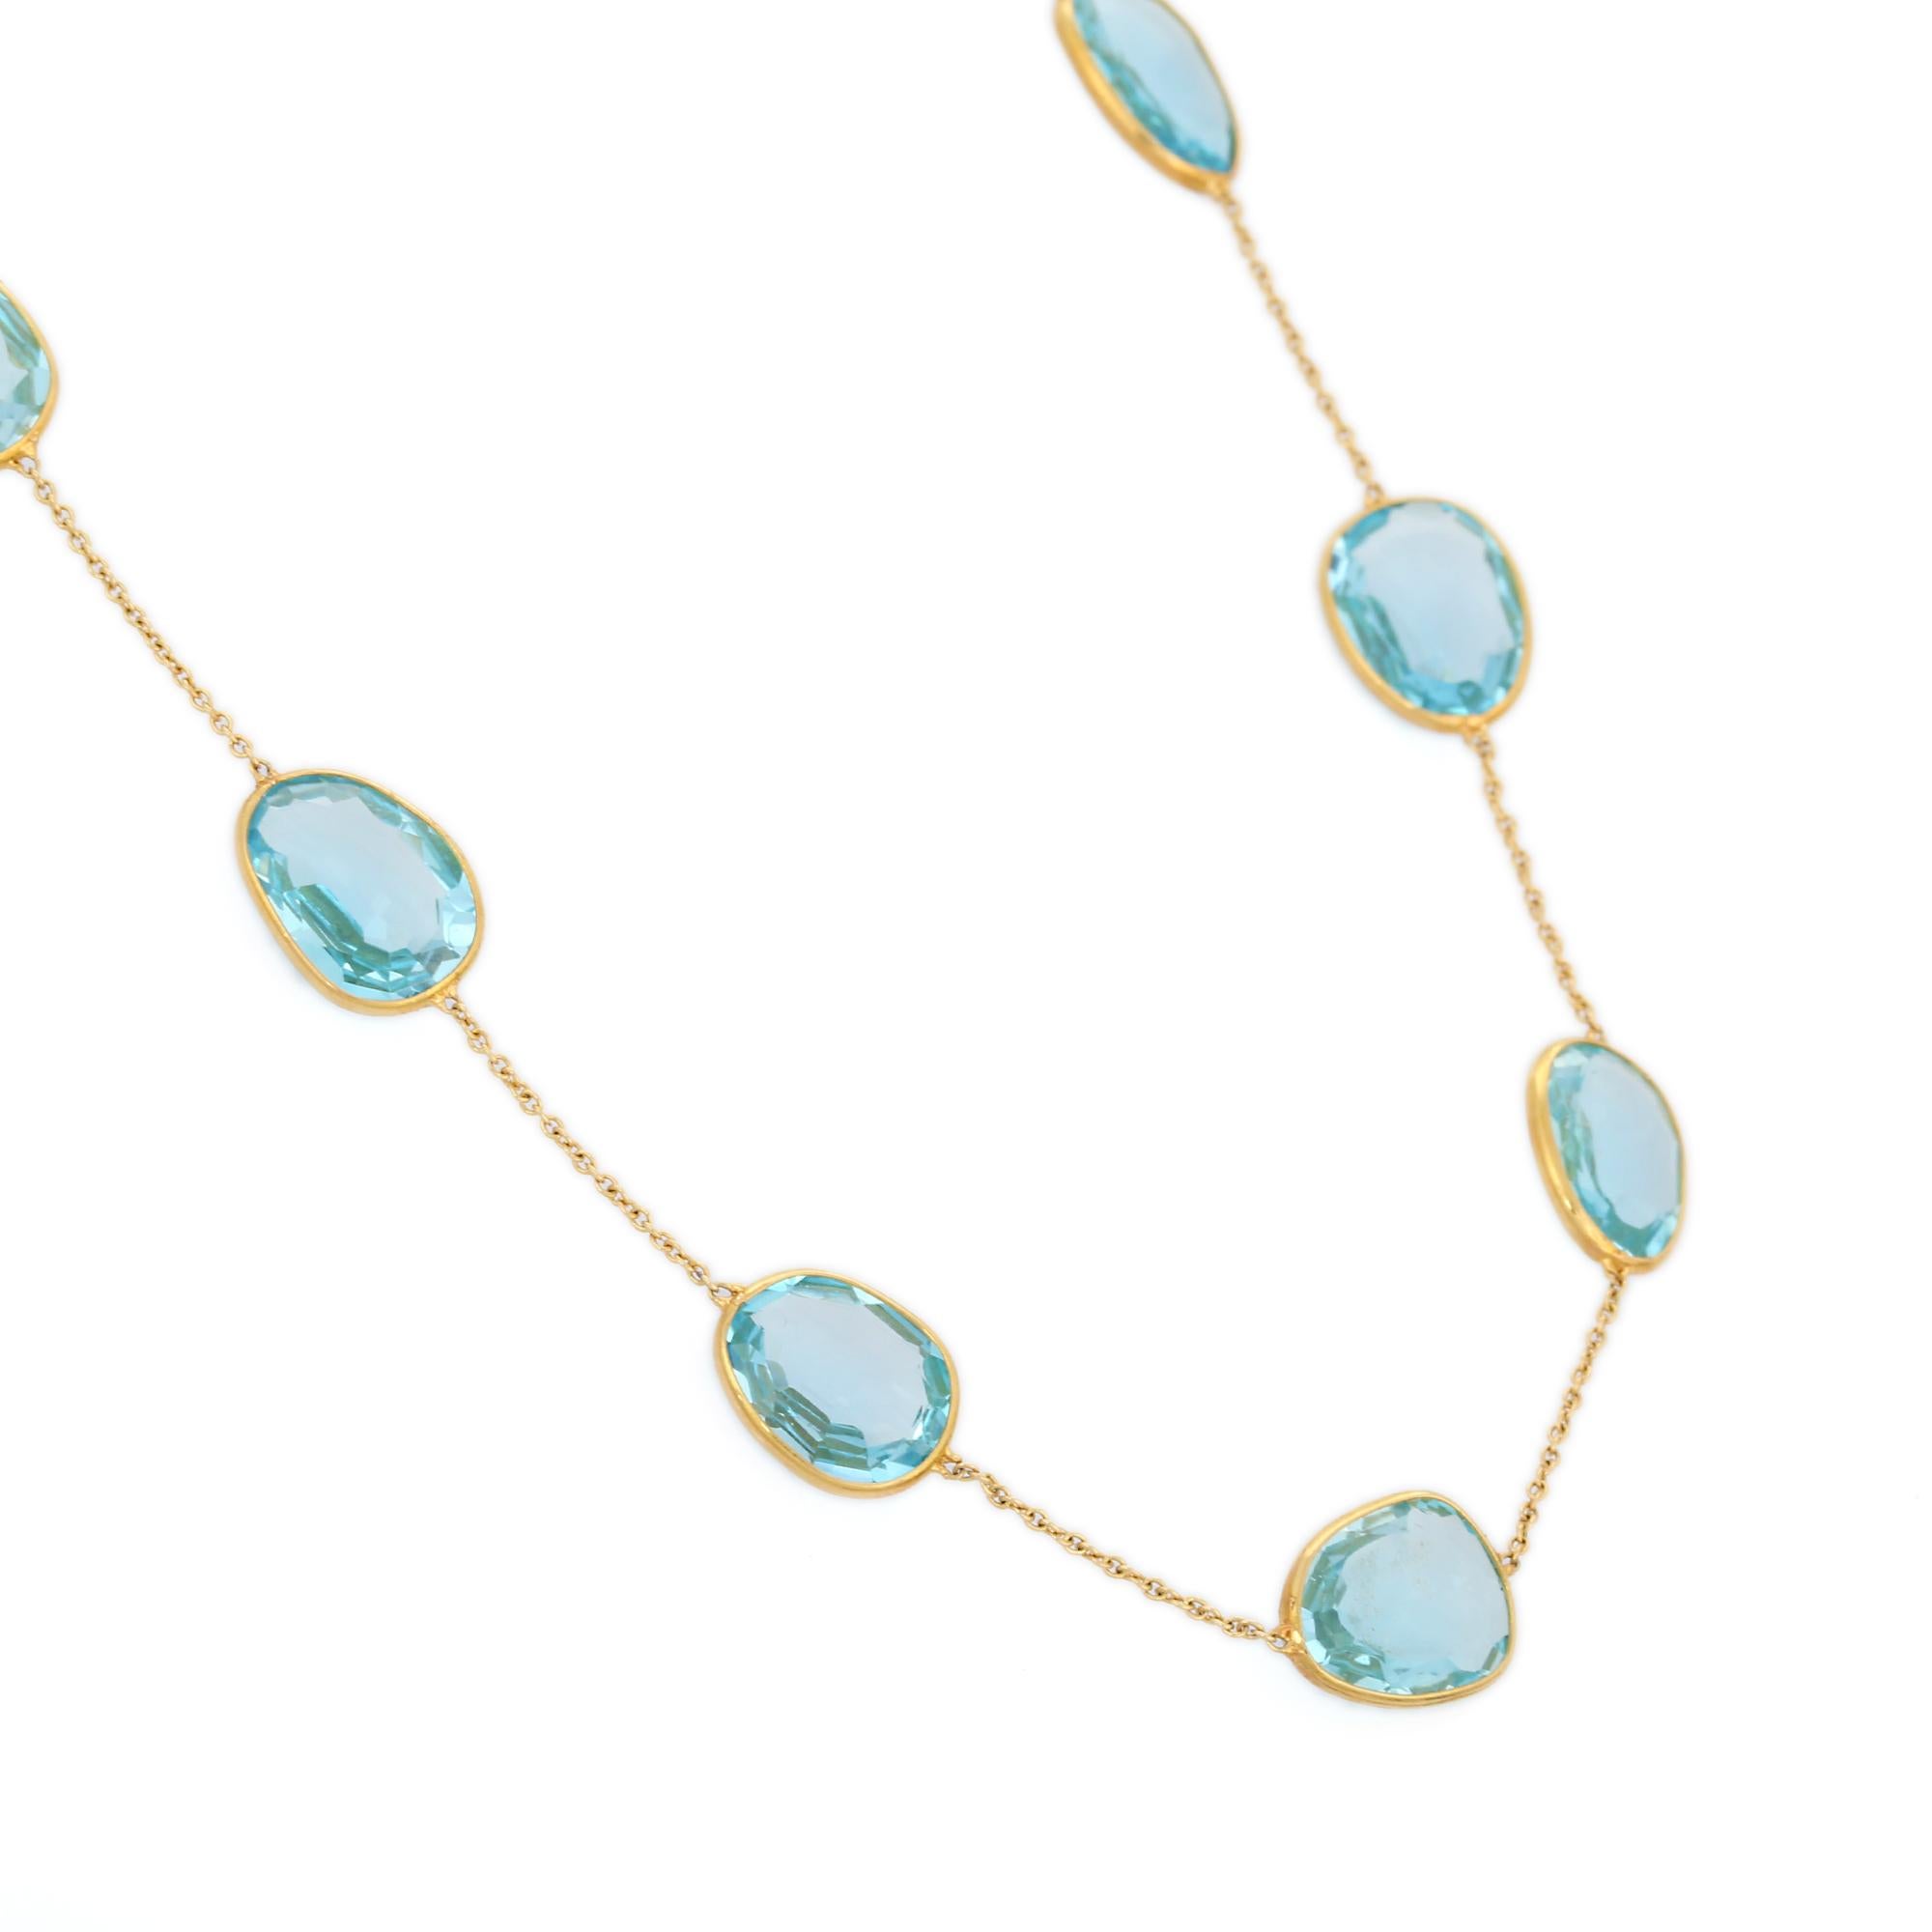 Blue Topaz Necklace in 18K Gold studded with oval cut topaz gemstones.
Accessorize your look with this elegant blue topaz chain necklace. This stunning piece of jewelry instantly elevates a casual look or dressy outfit. Comfortable and easy to wear,